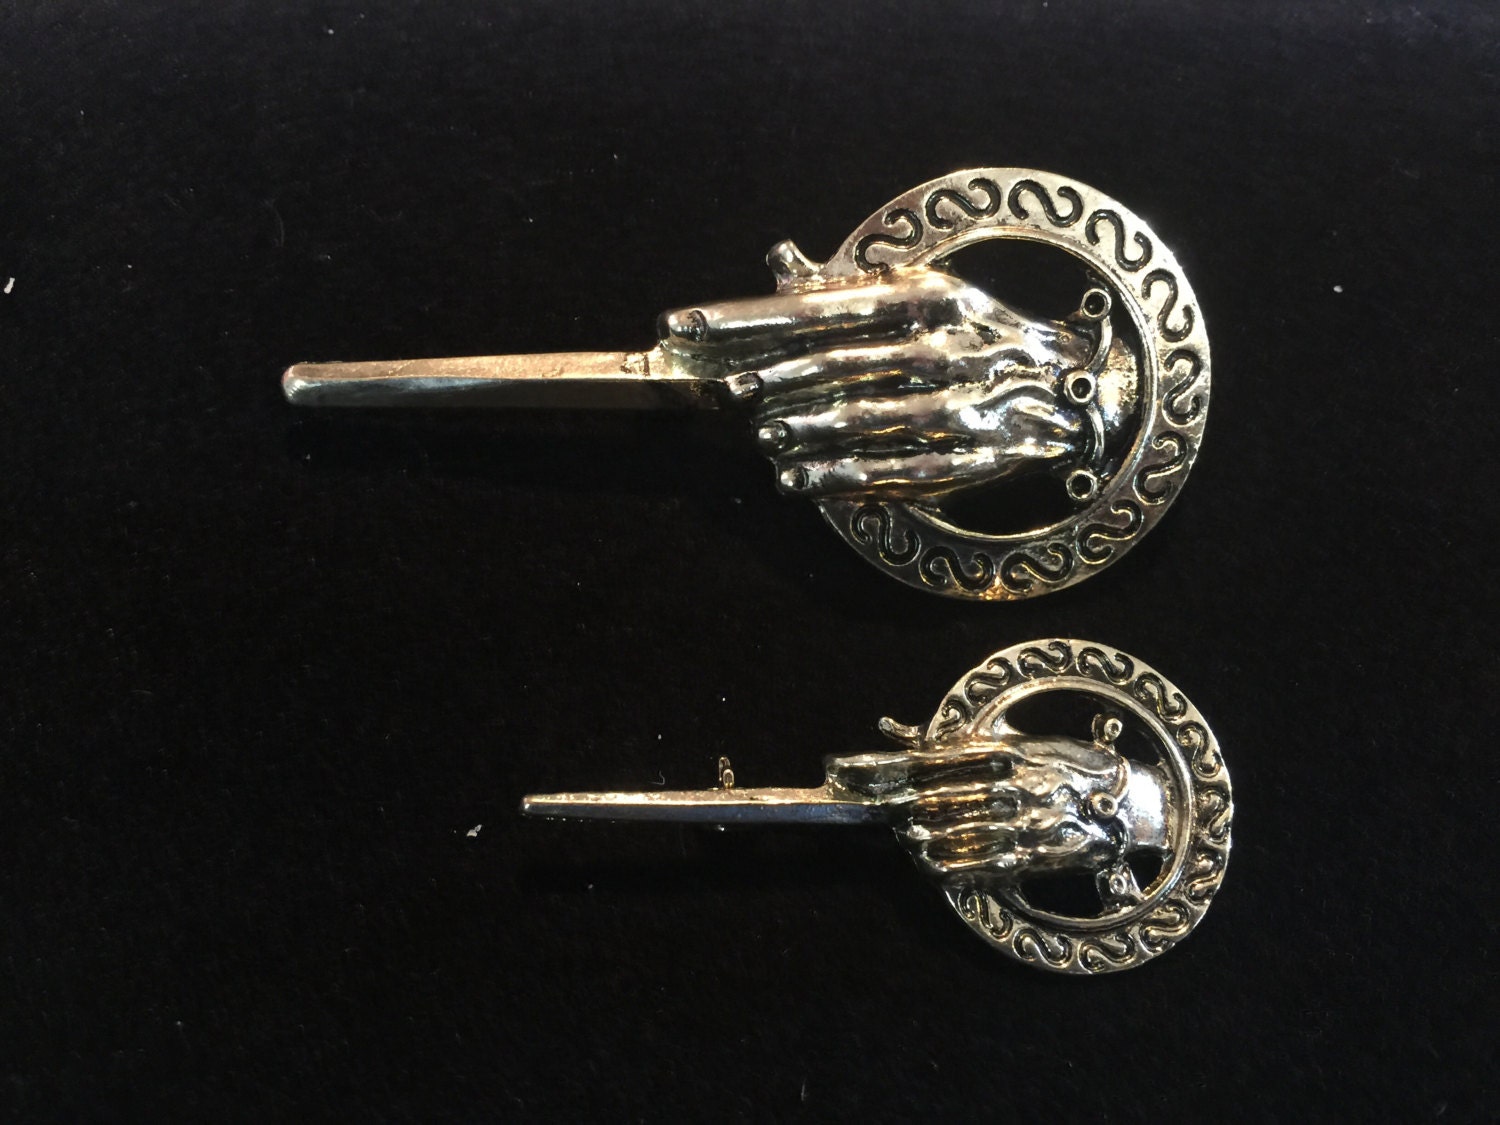 Game of Thrones Hand of the King Pin Scale by FandomRevolution